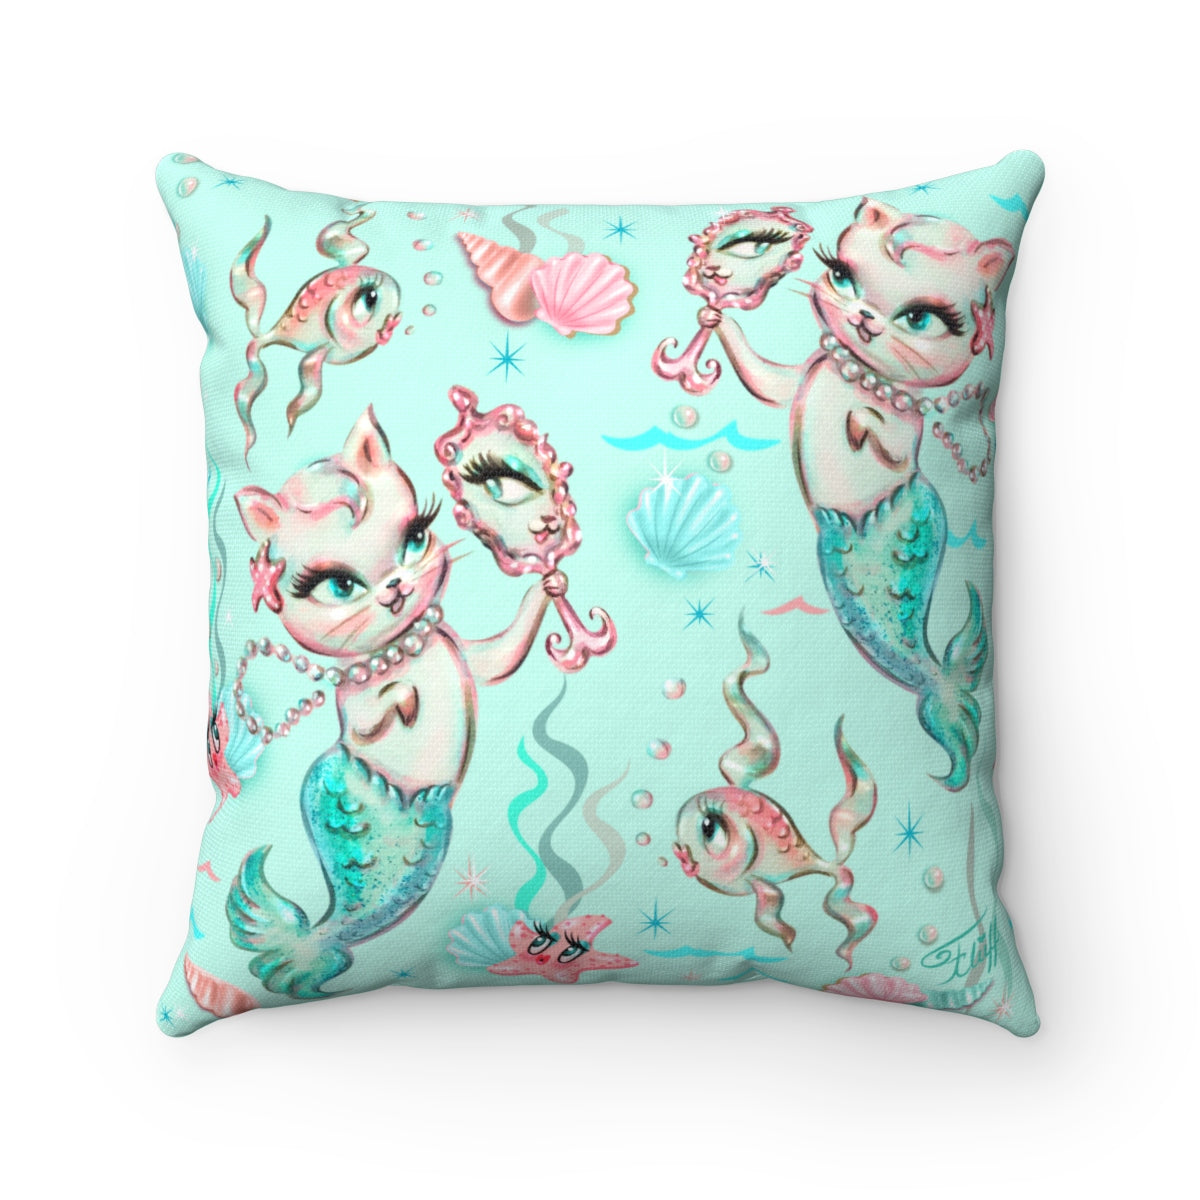 Merkittens with Pearls Aqua • Square Pillow